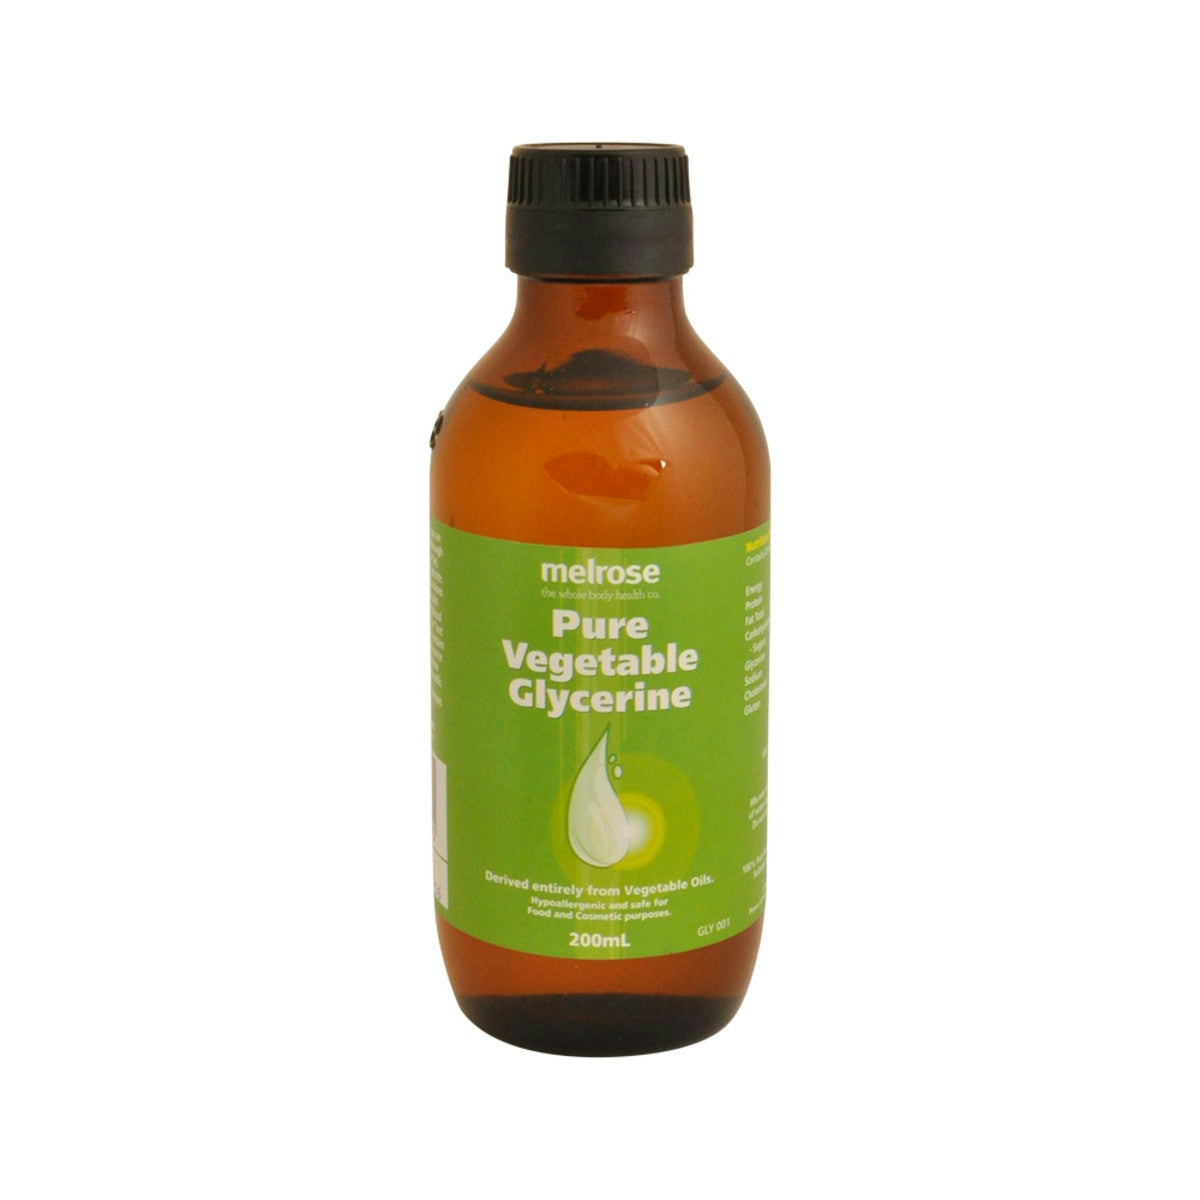 image of Melrose Pure Vegetable Glycerine 200ml with white background